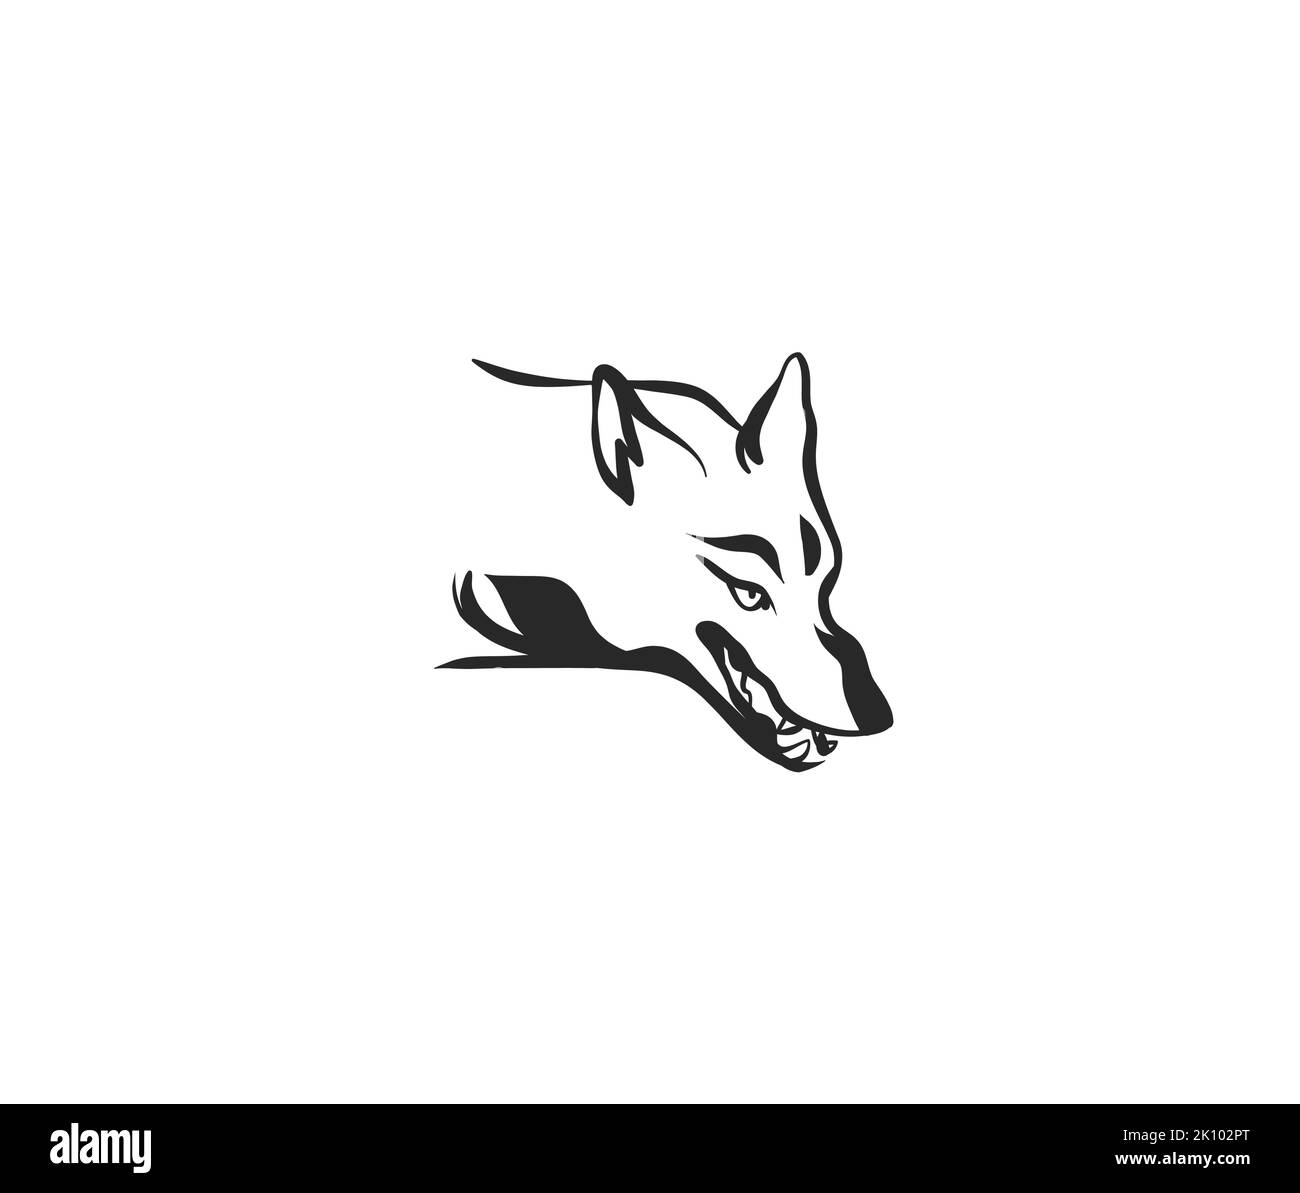 Hand drawn vector abstract stock flat graphic illustration collection with logo elements of magic wolf head silhouette isolated on white background. Stock Vector